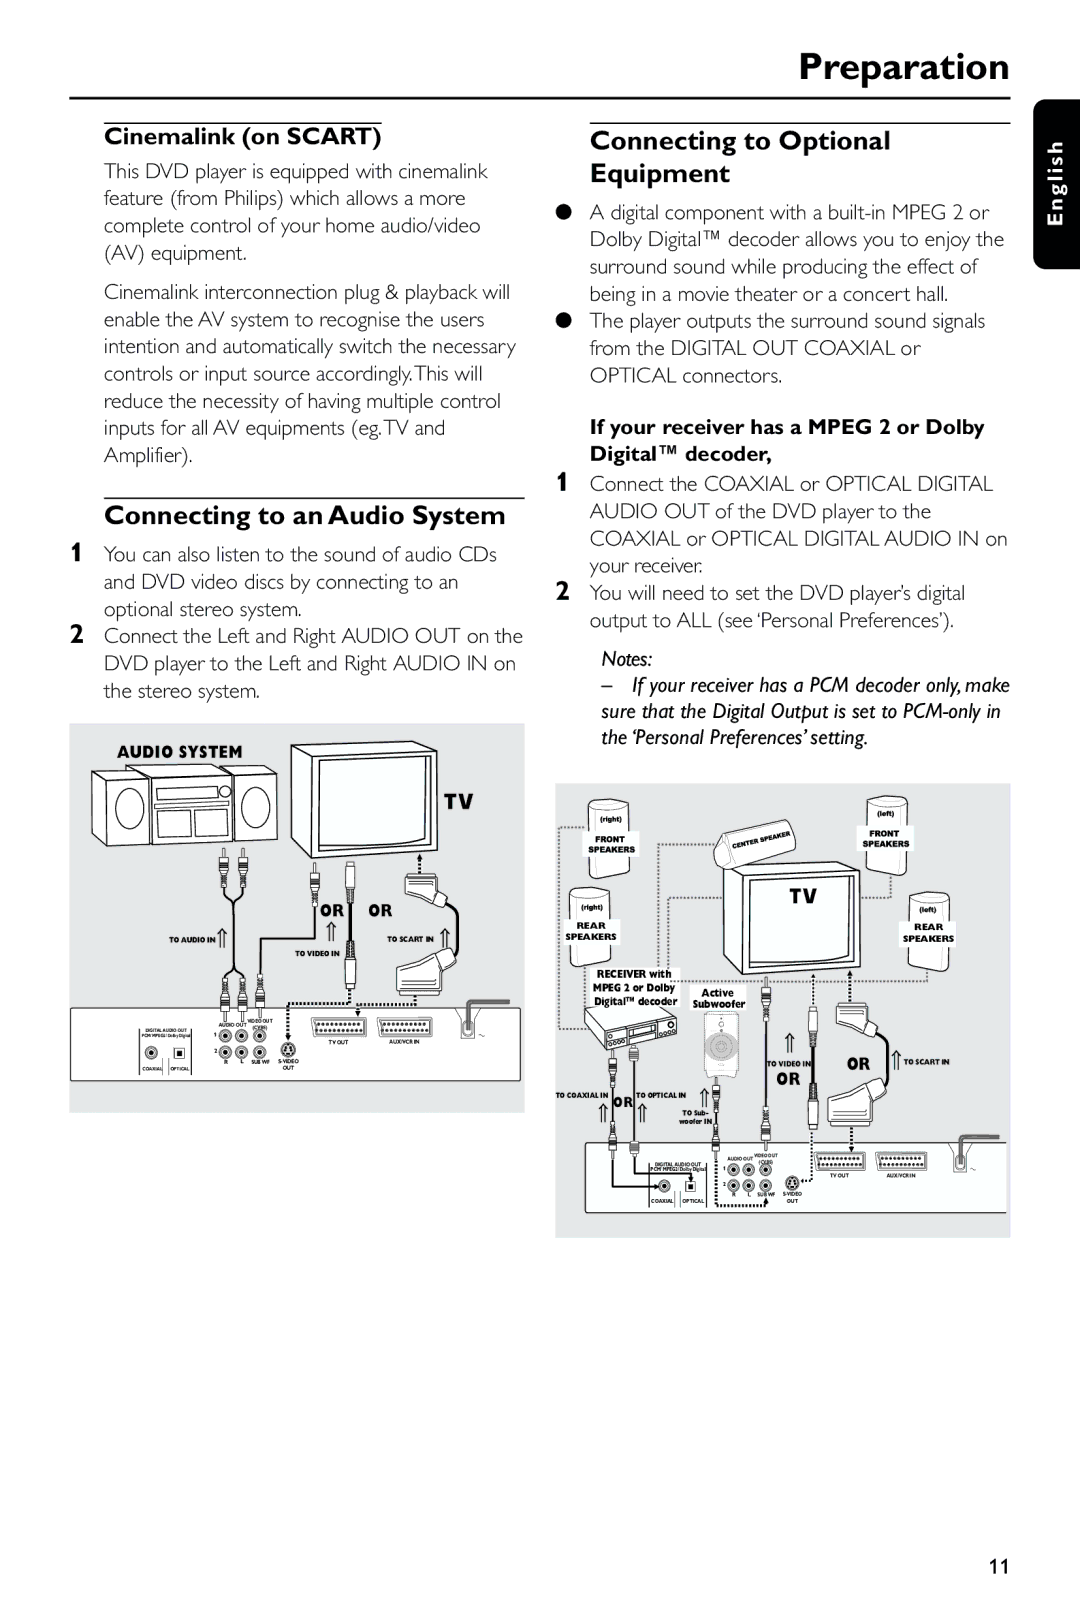 Philips DVD743HC/021 manual Connecting to an Audio System, Connecting to Optional Equipment, Cinemalink on Scart 